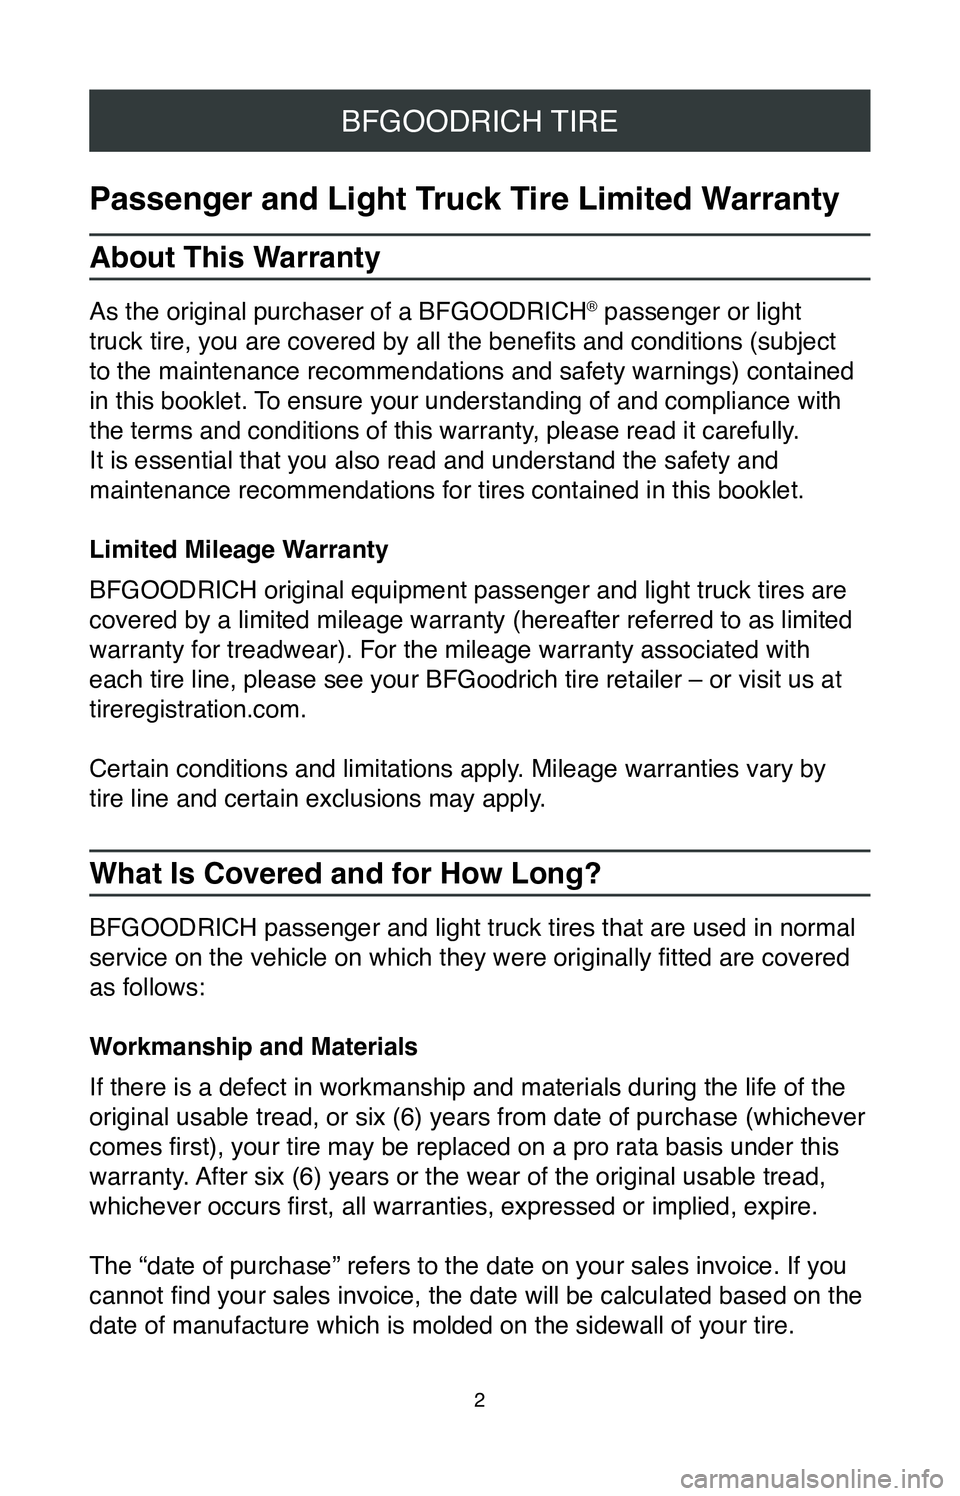 TOYOTA COROLLA HYBRID 2020  Warranties & Maintenance Guides (in English) 2
BFGOODRICH TIRE
Passenger and Light Truck Tire Limited Warranty
About This Warranty
As the original purchaser of a BFGOODRICH® passenger or light 
truck tire, you are covered by all the benefits an